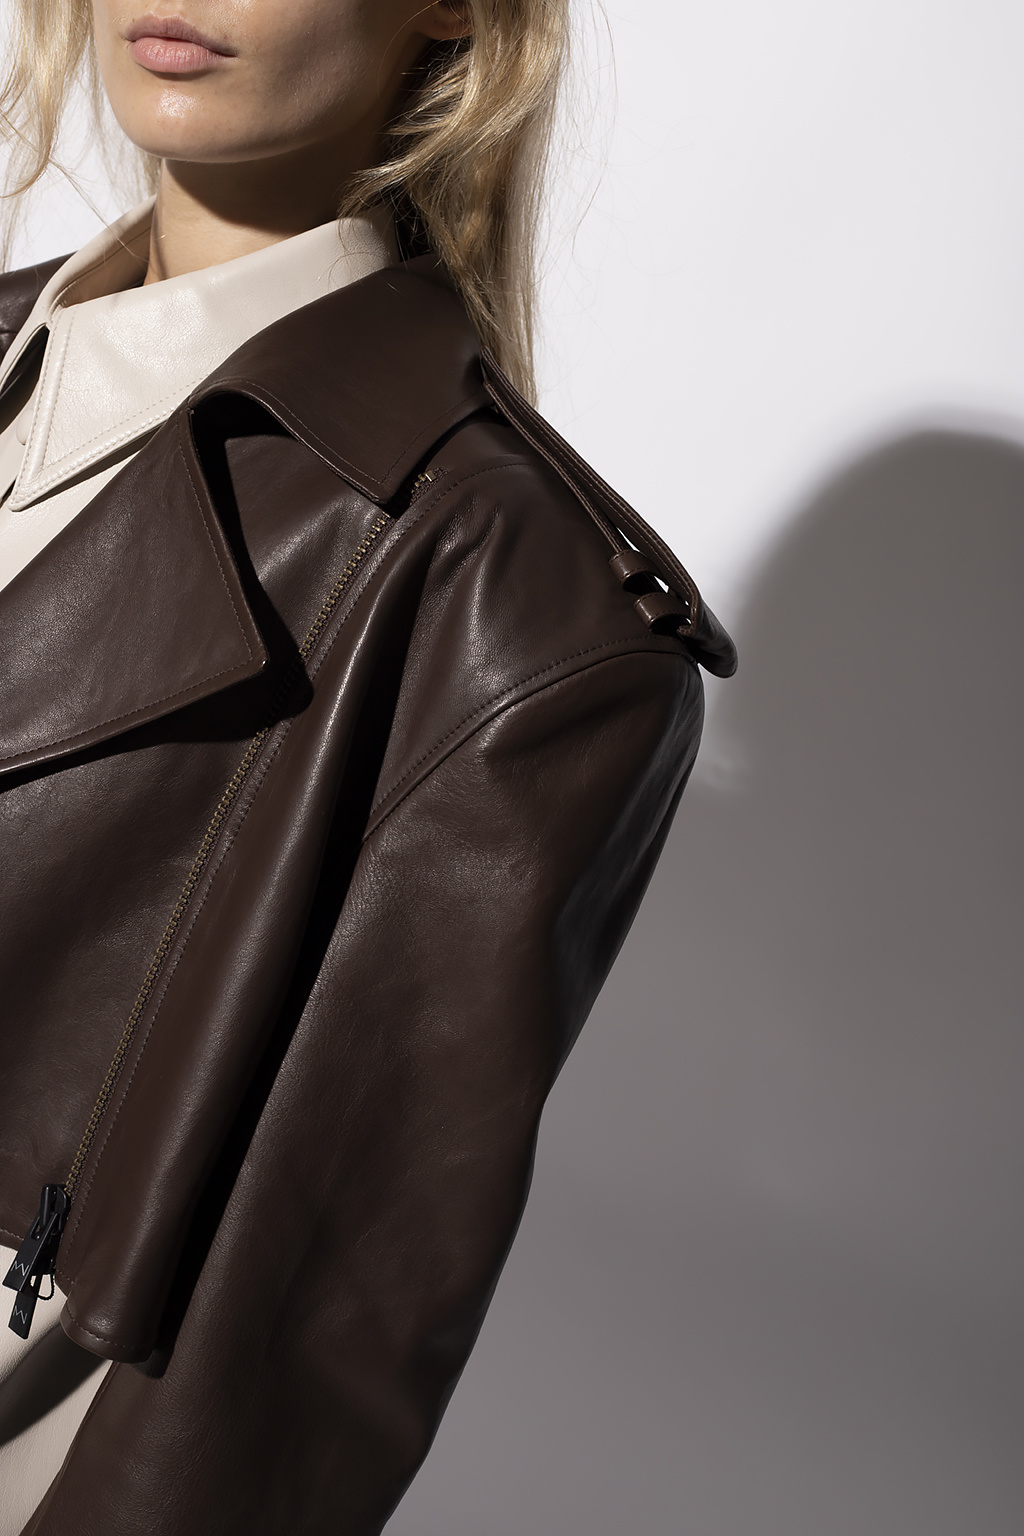 All You Need to Know About Leather Jackets – MAHI Leather